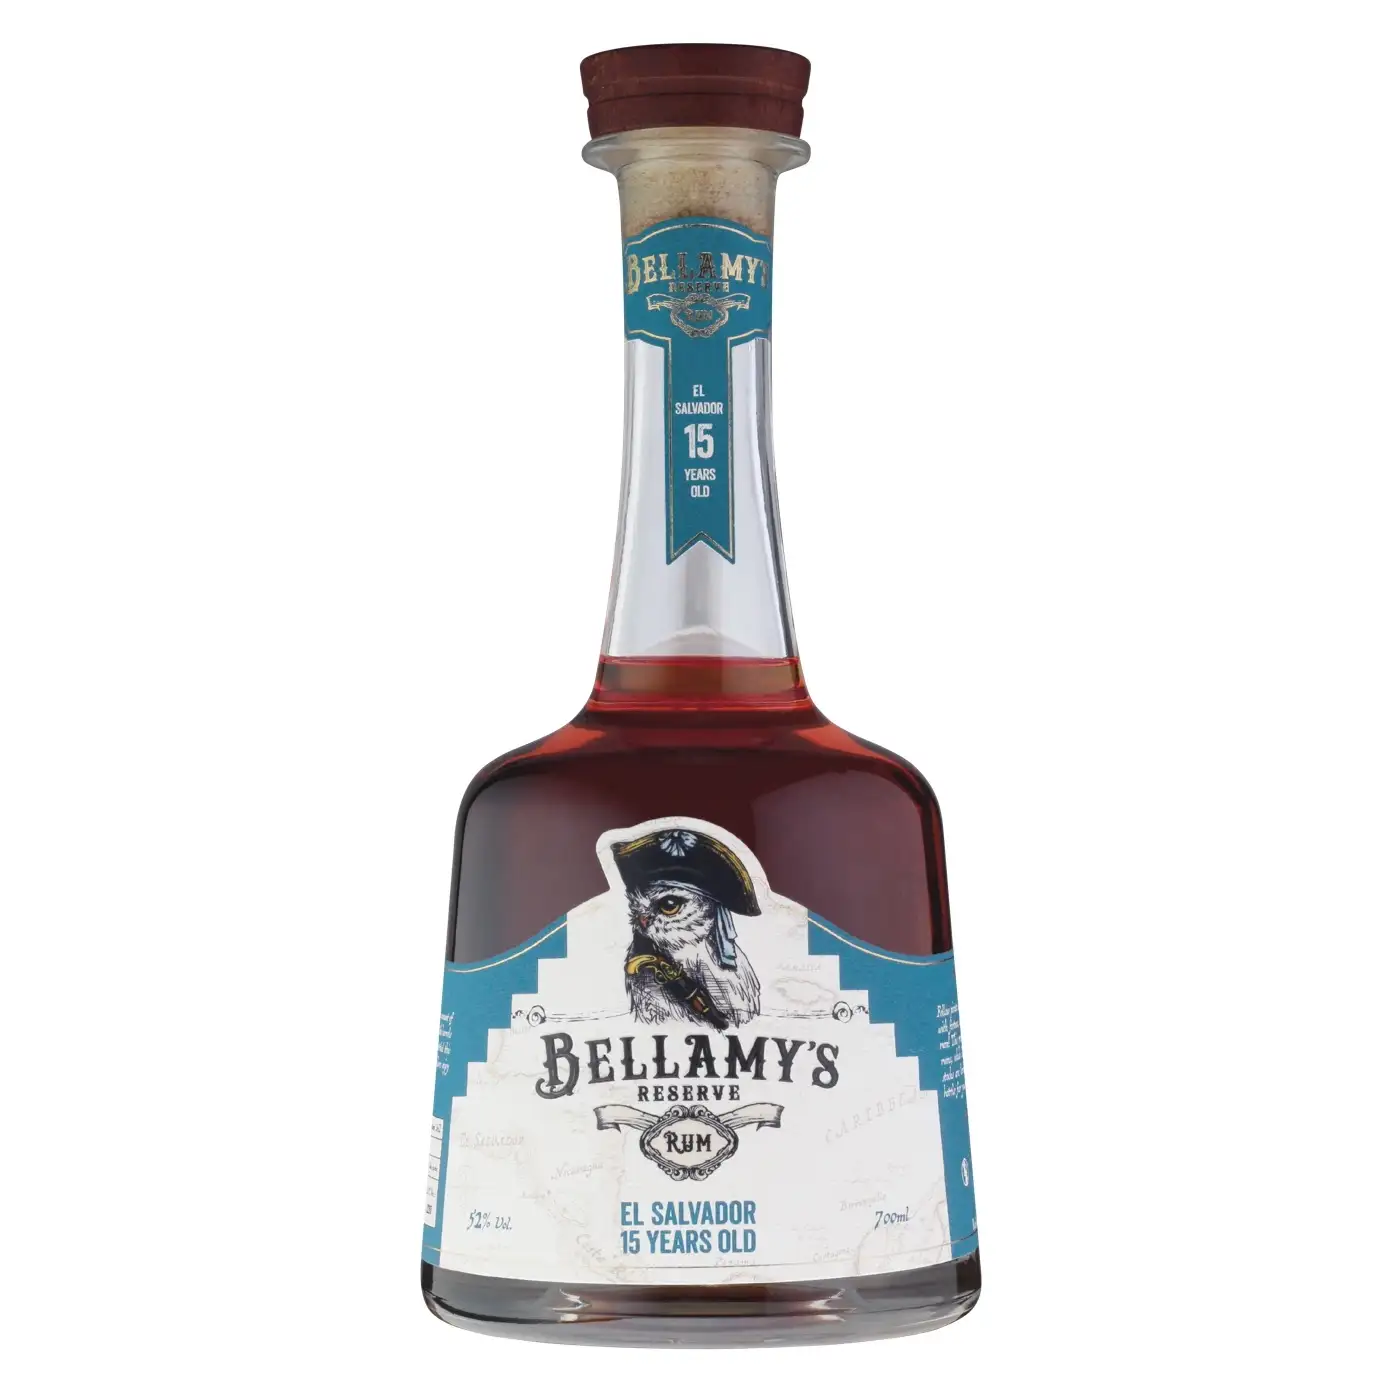 Image of the front of the bottle of the rum Bellamy‘s Reserve El Salvador 15 years old Cihuatán Cask Finish